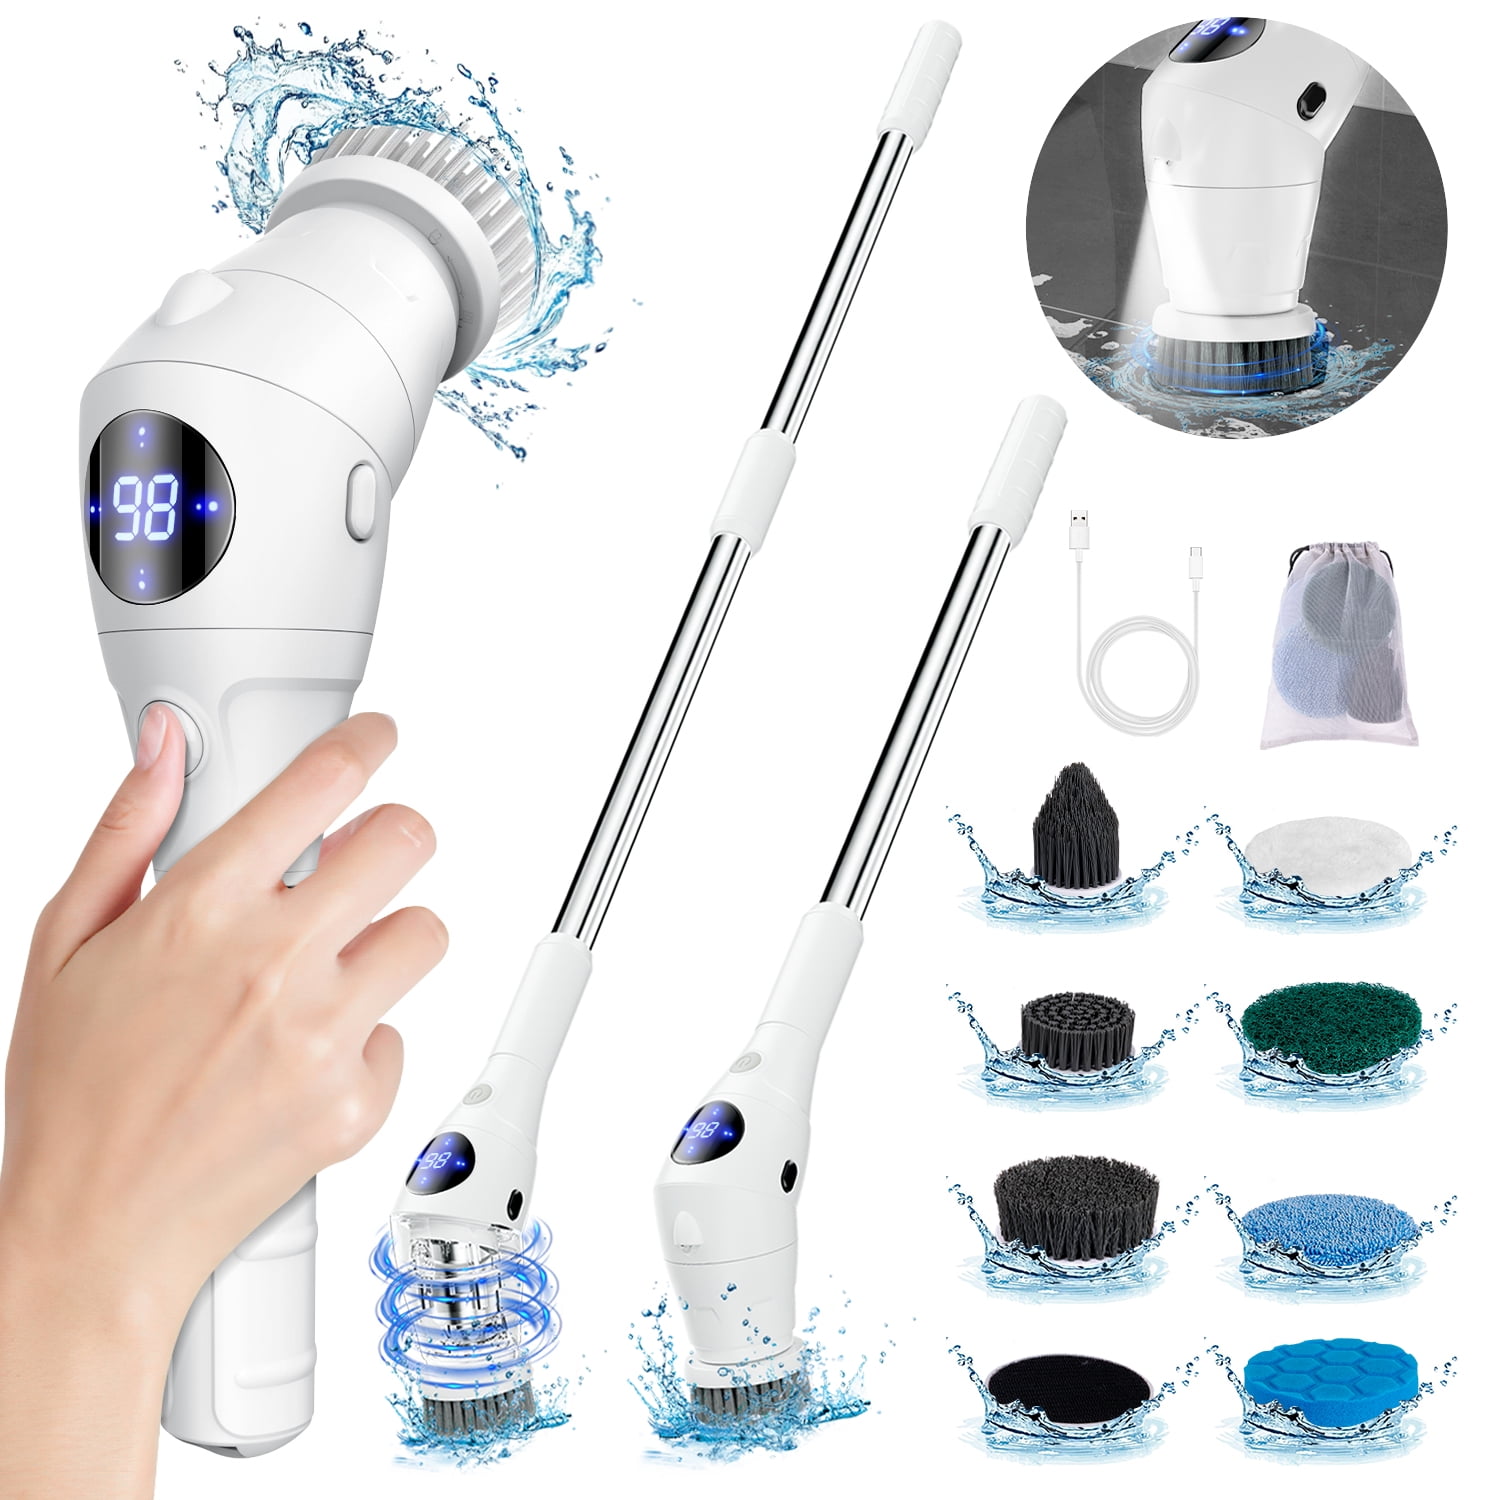 This Handy Electric Spin Scrubber Is 43% Off at